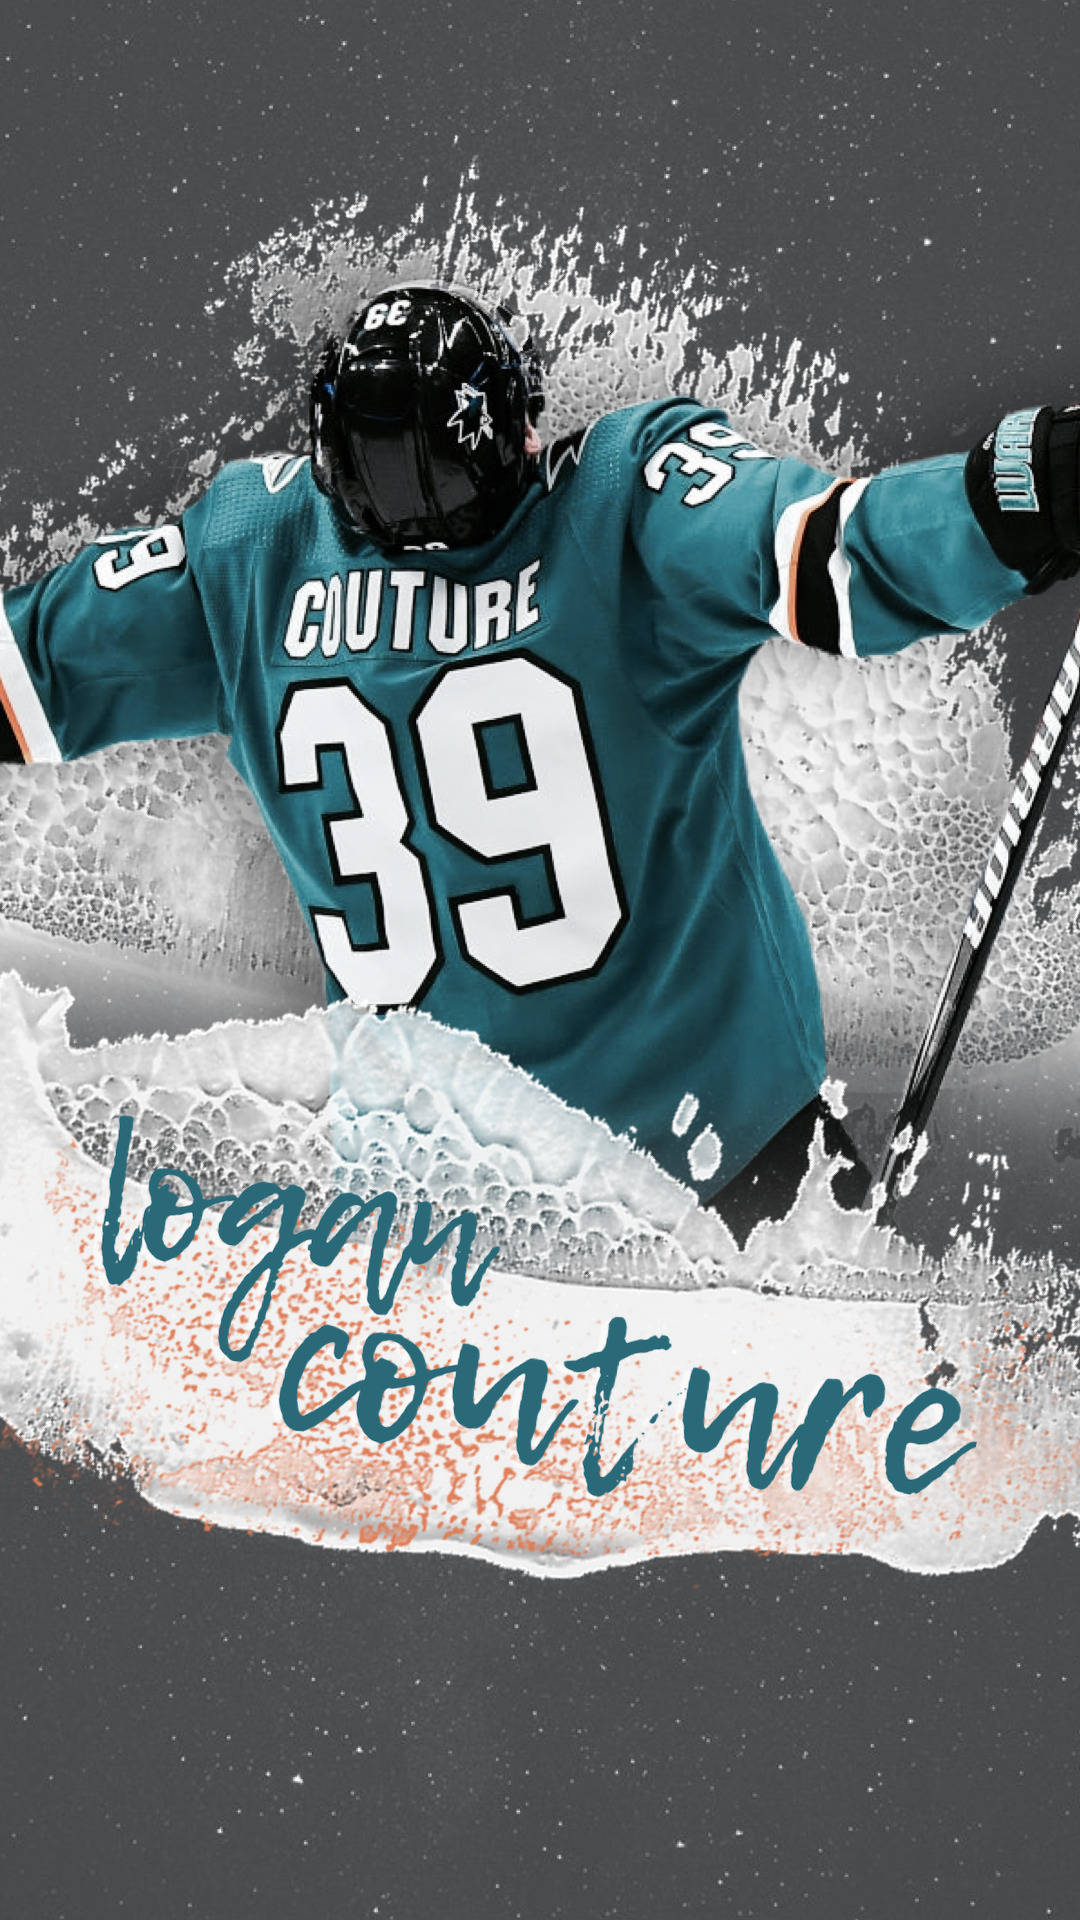 Logan Couture - A Vision of Strength on Ice Wallpaper